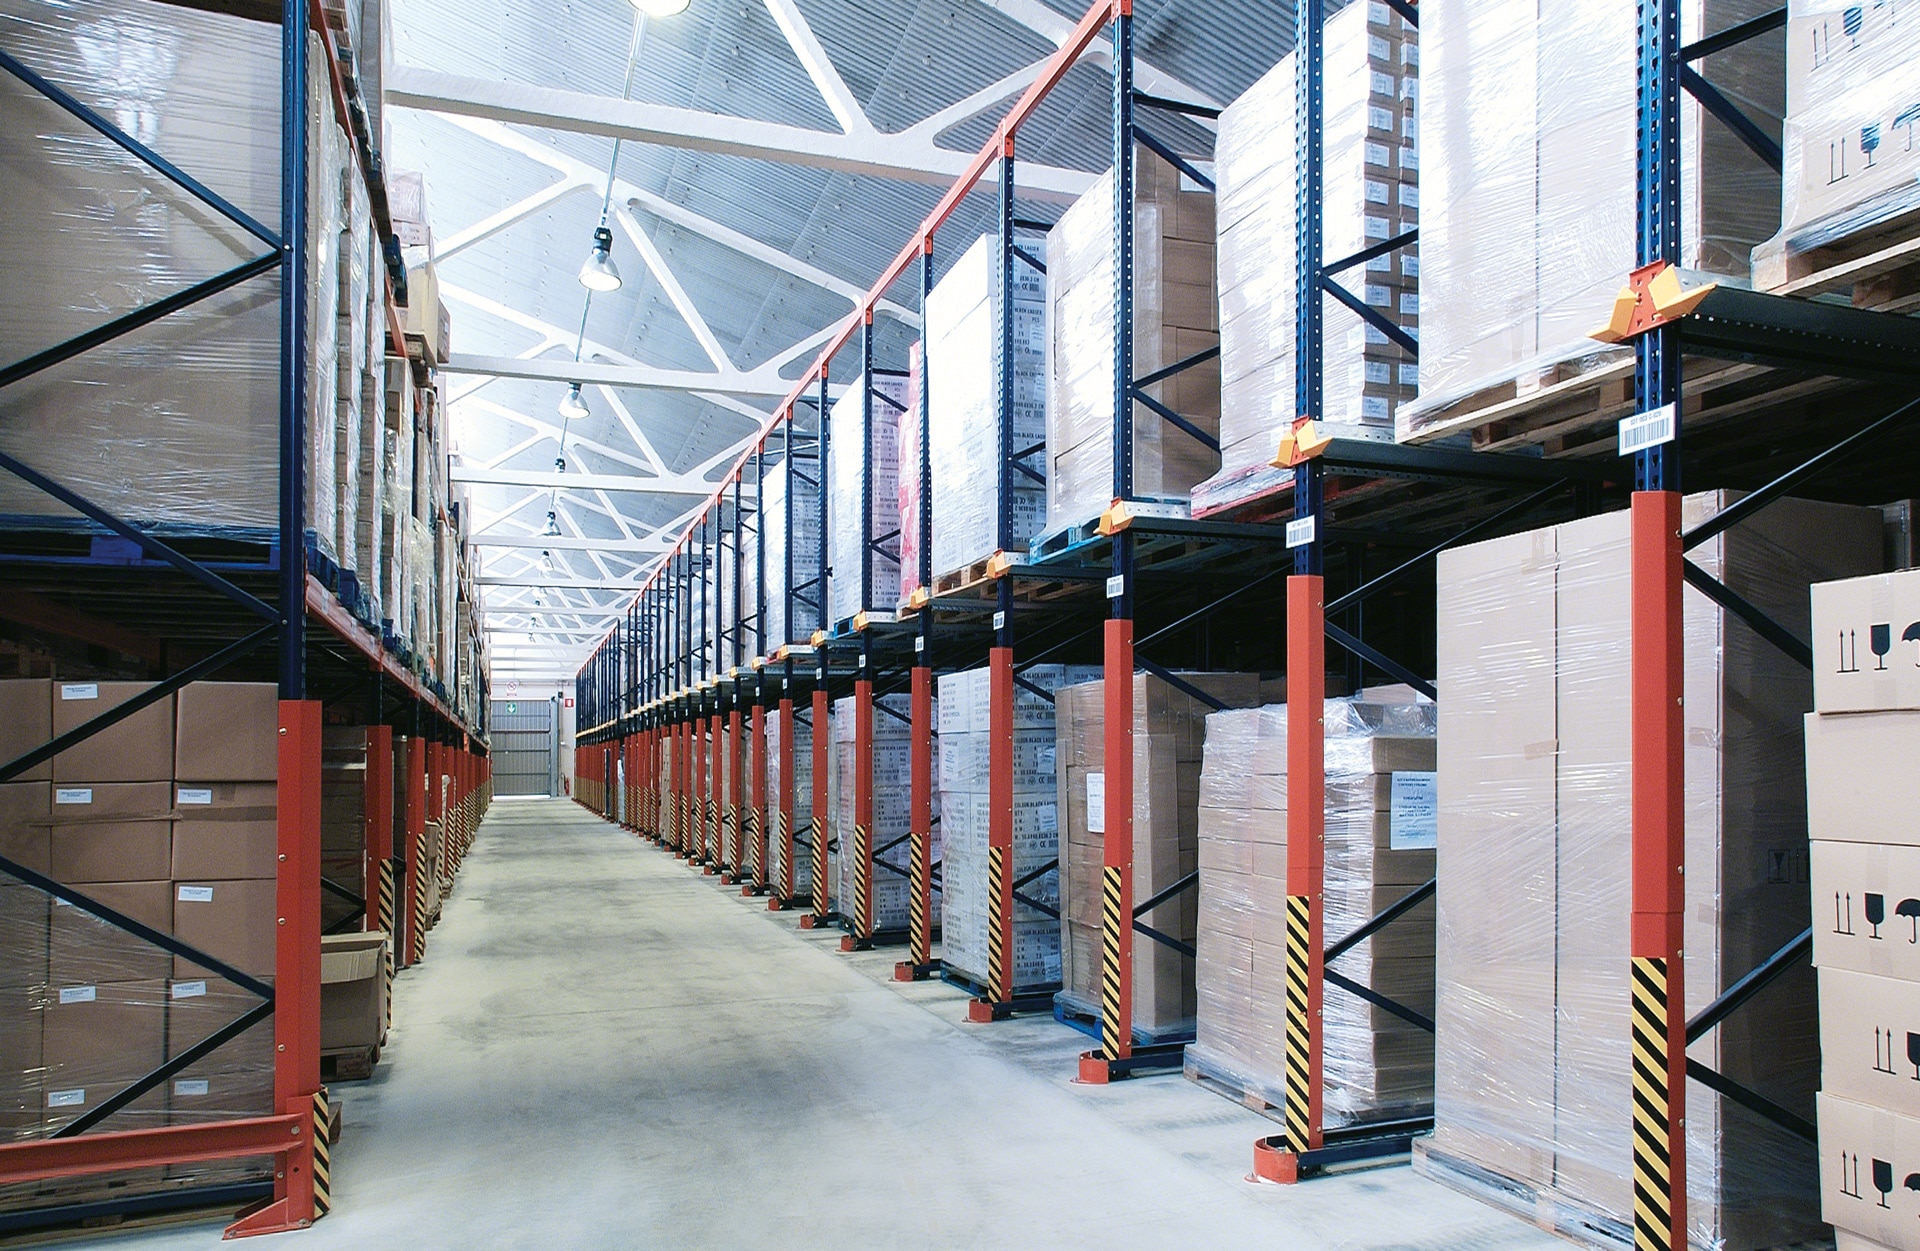 If necessary, double upright protectors can be installed to increase the protection of the compact racking system